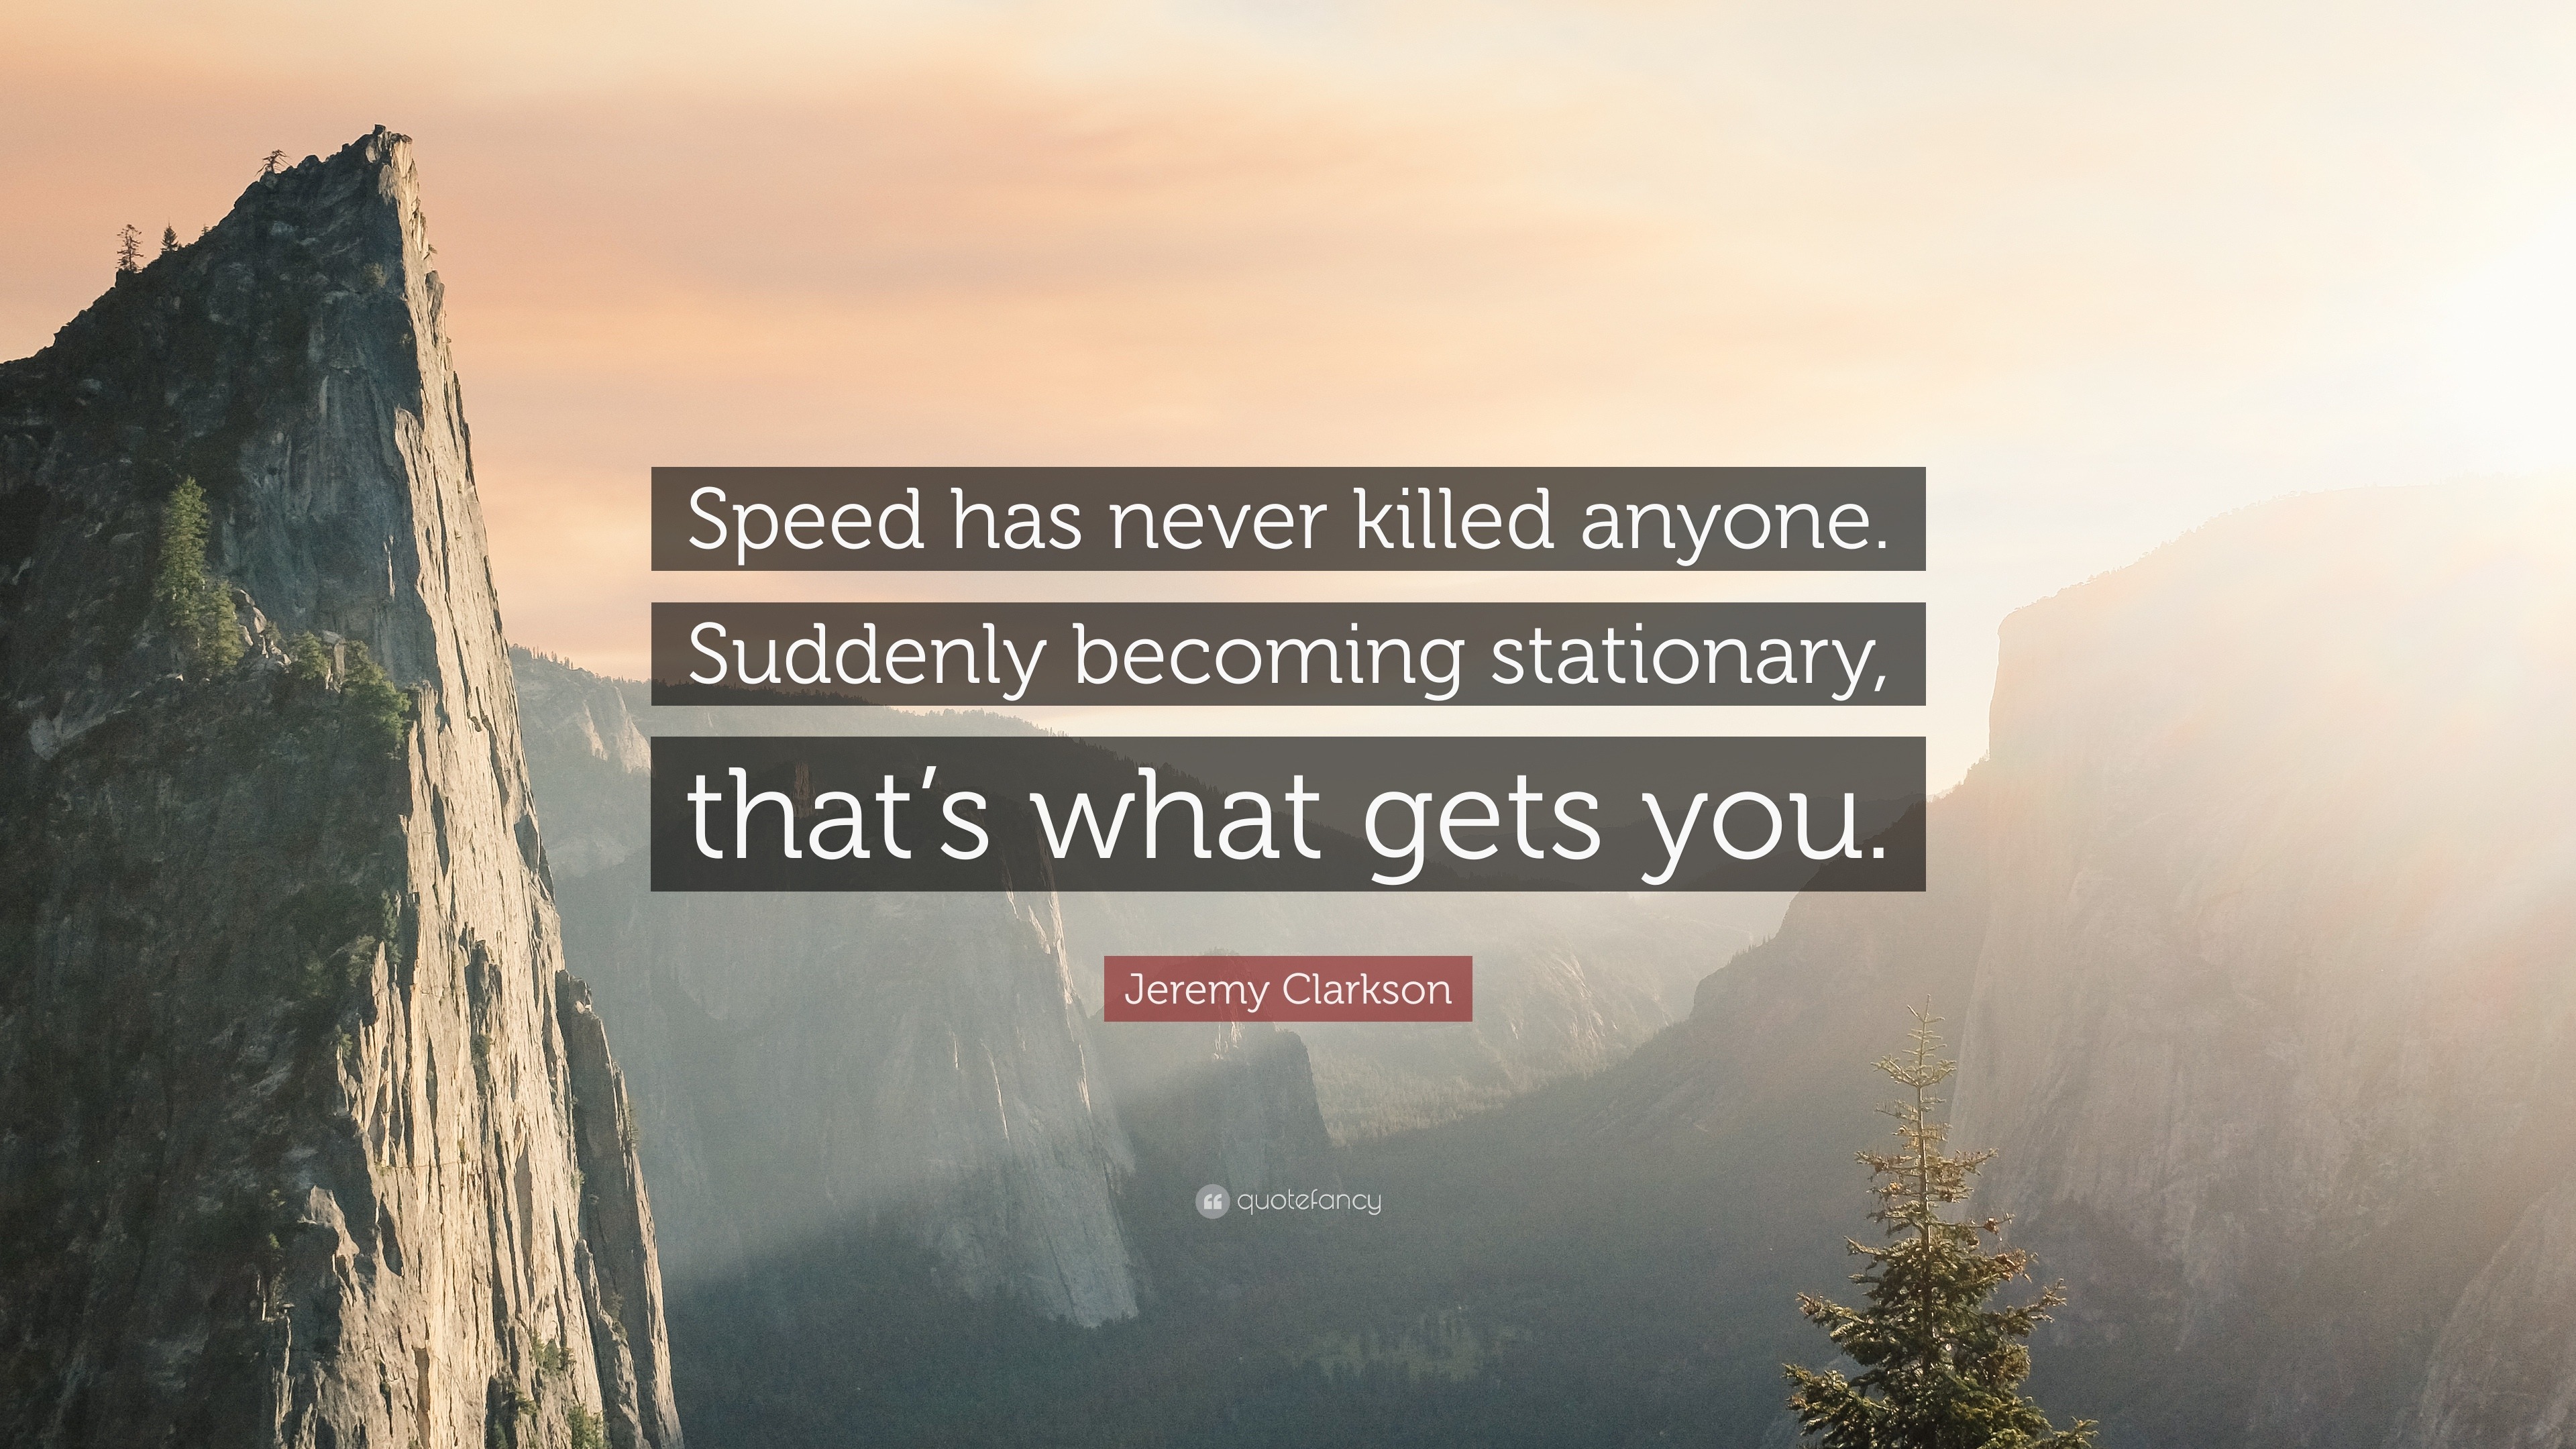 Top 49 Need For Speed Quotes: Famous Quotes & Sayings About Need For Speed